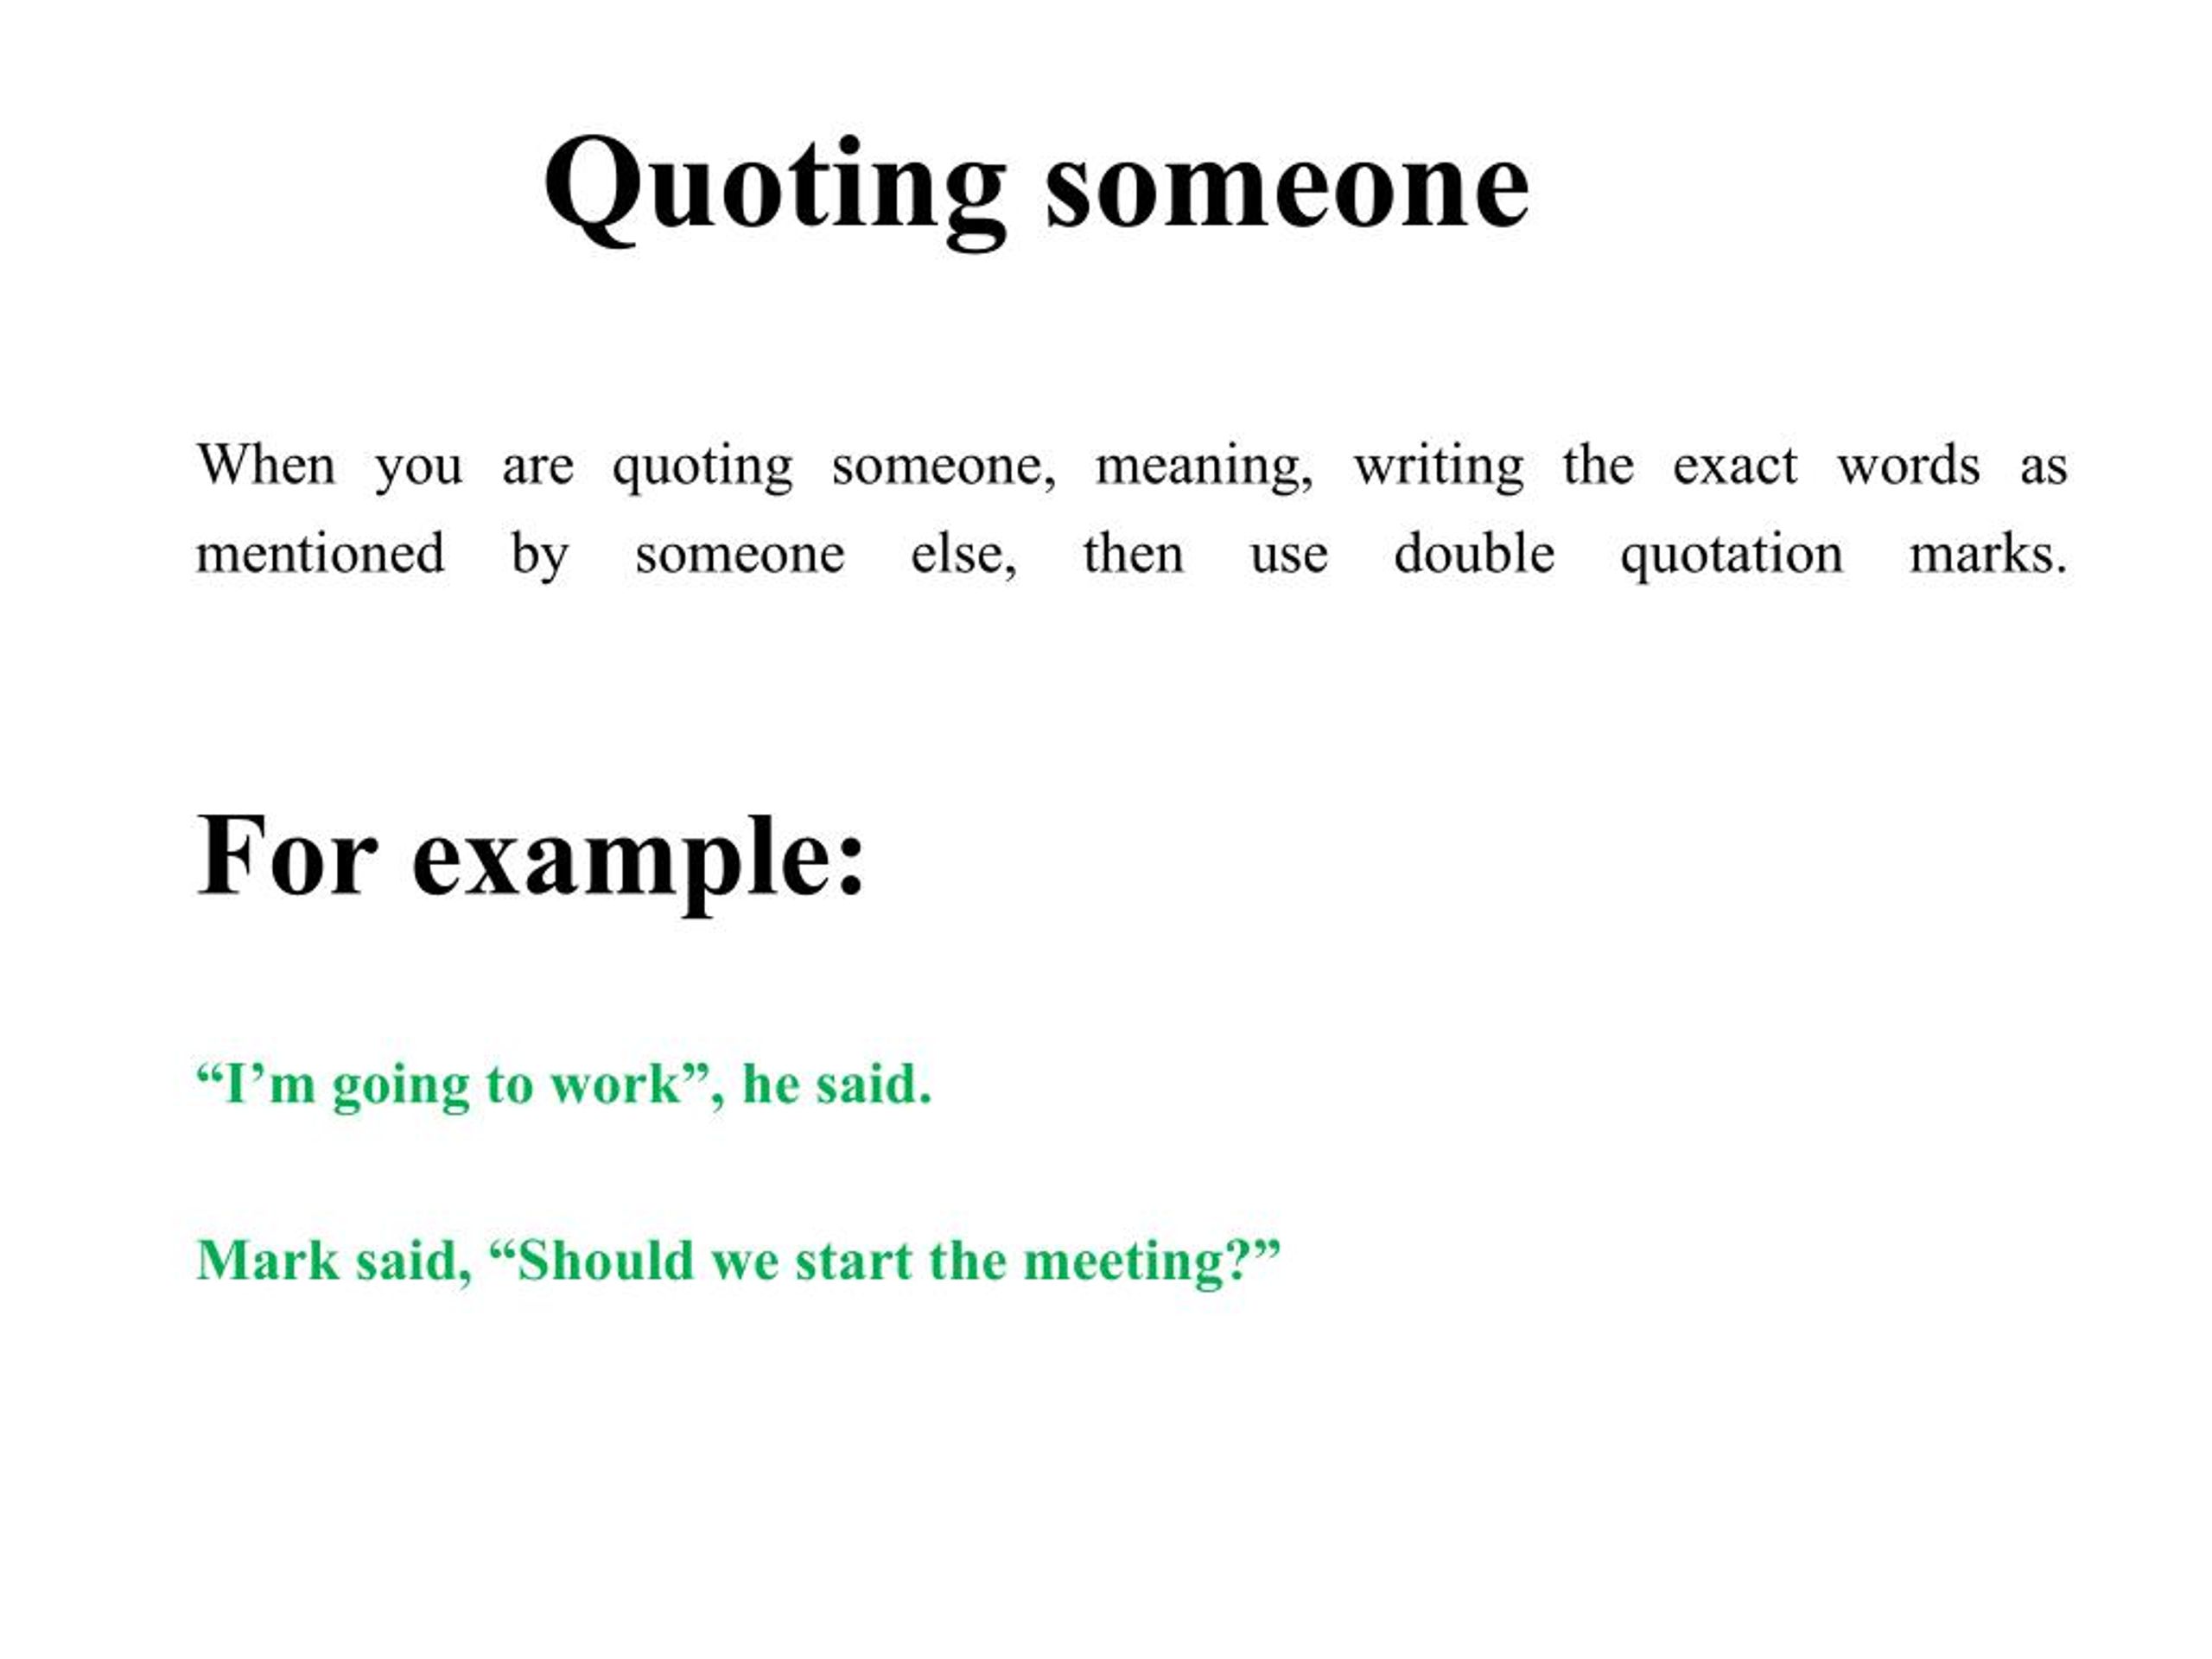 PPT - How to use quotation marks in English Writing? PowerPoint ...